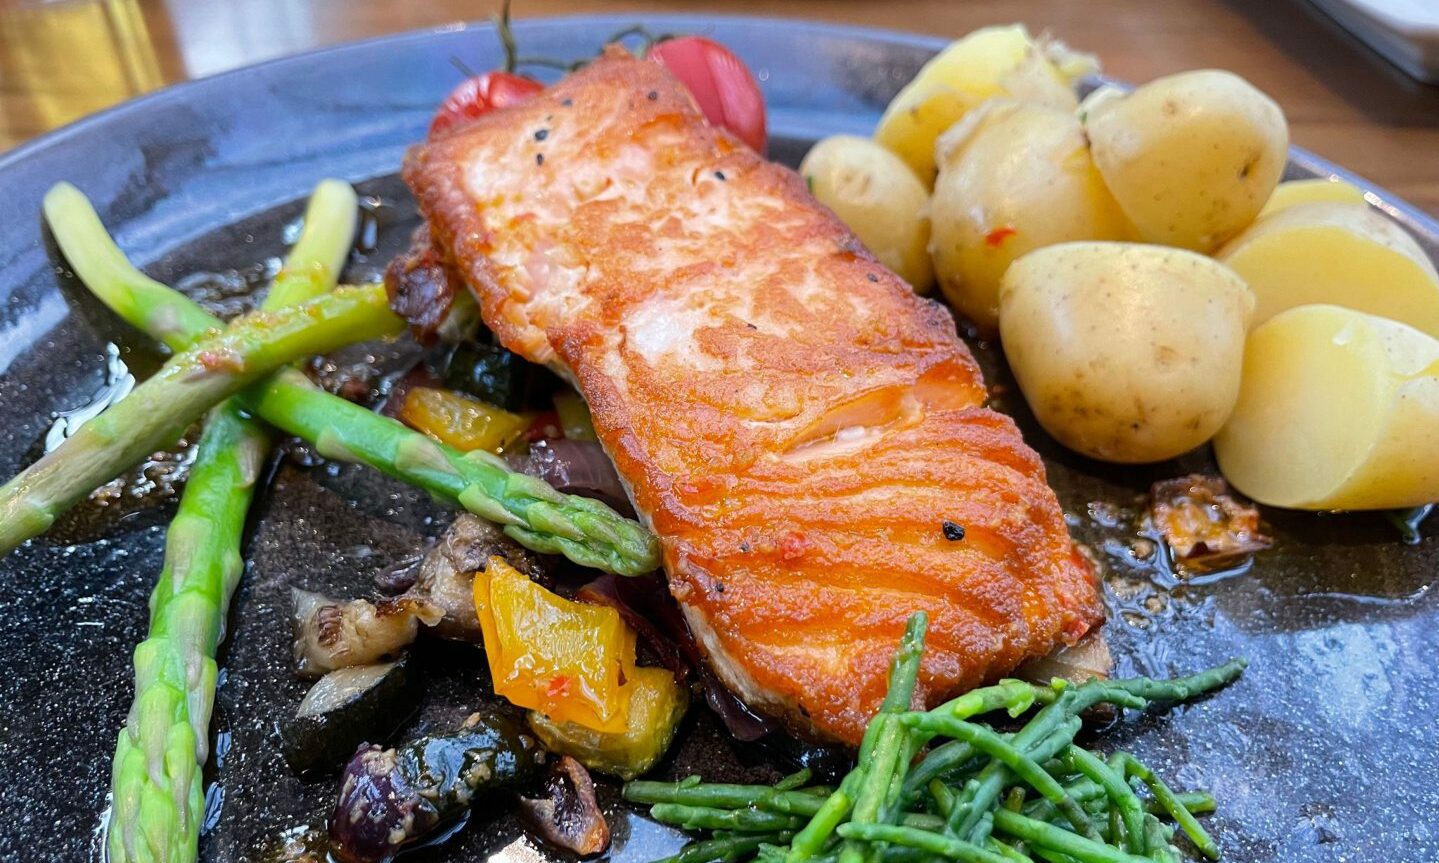 The golden-coloured salmon from Ferryhill House Hotel along with asparagus, baby potatoes, cherry tomatoes and samphire